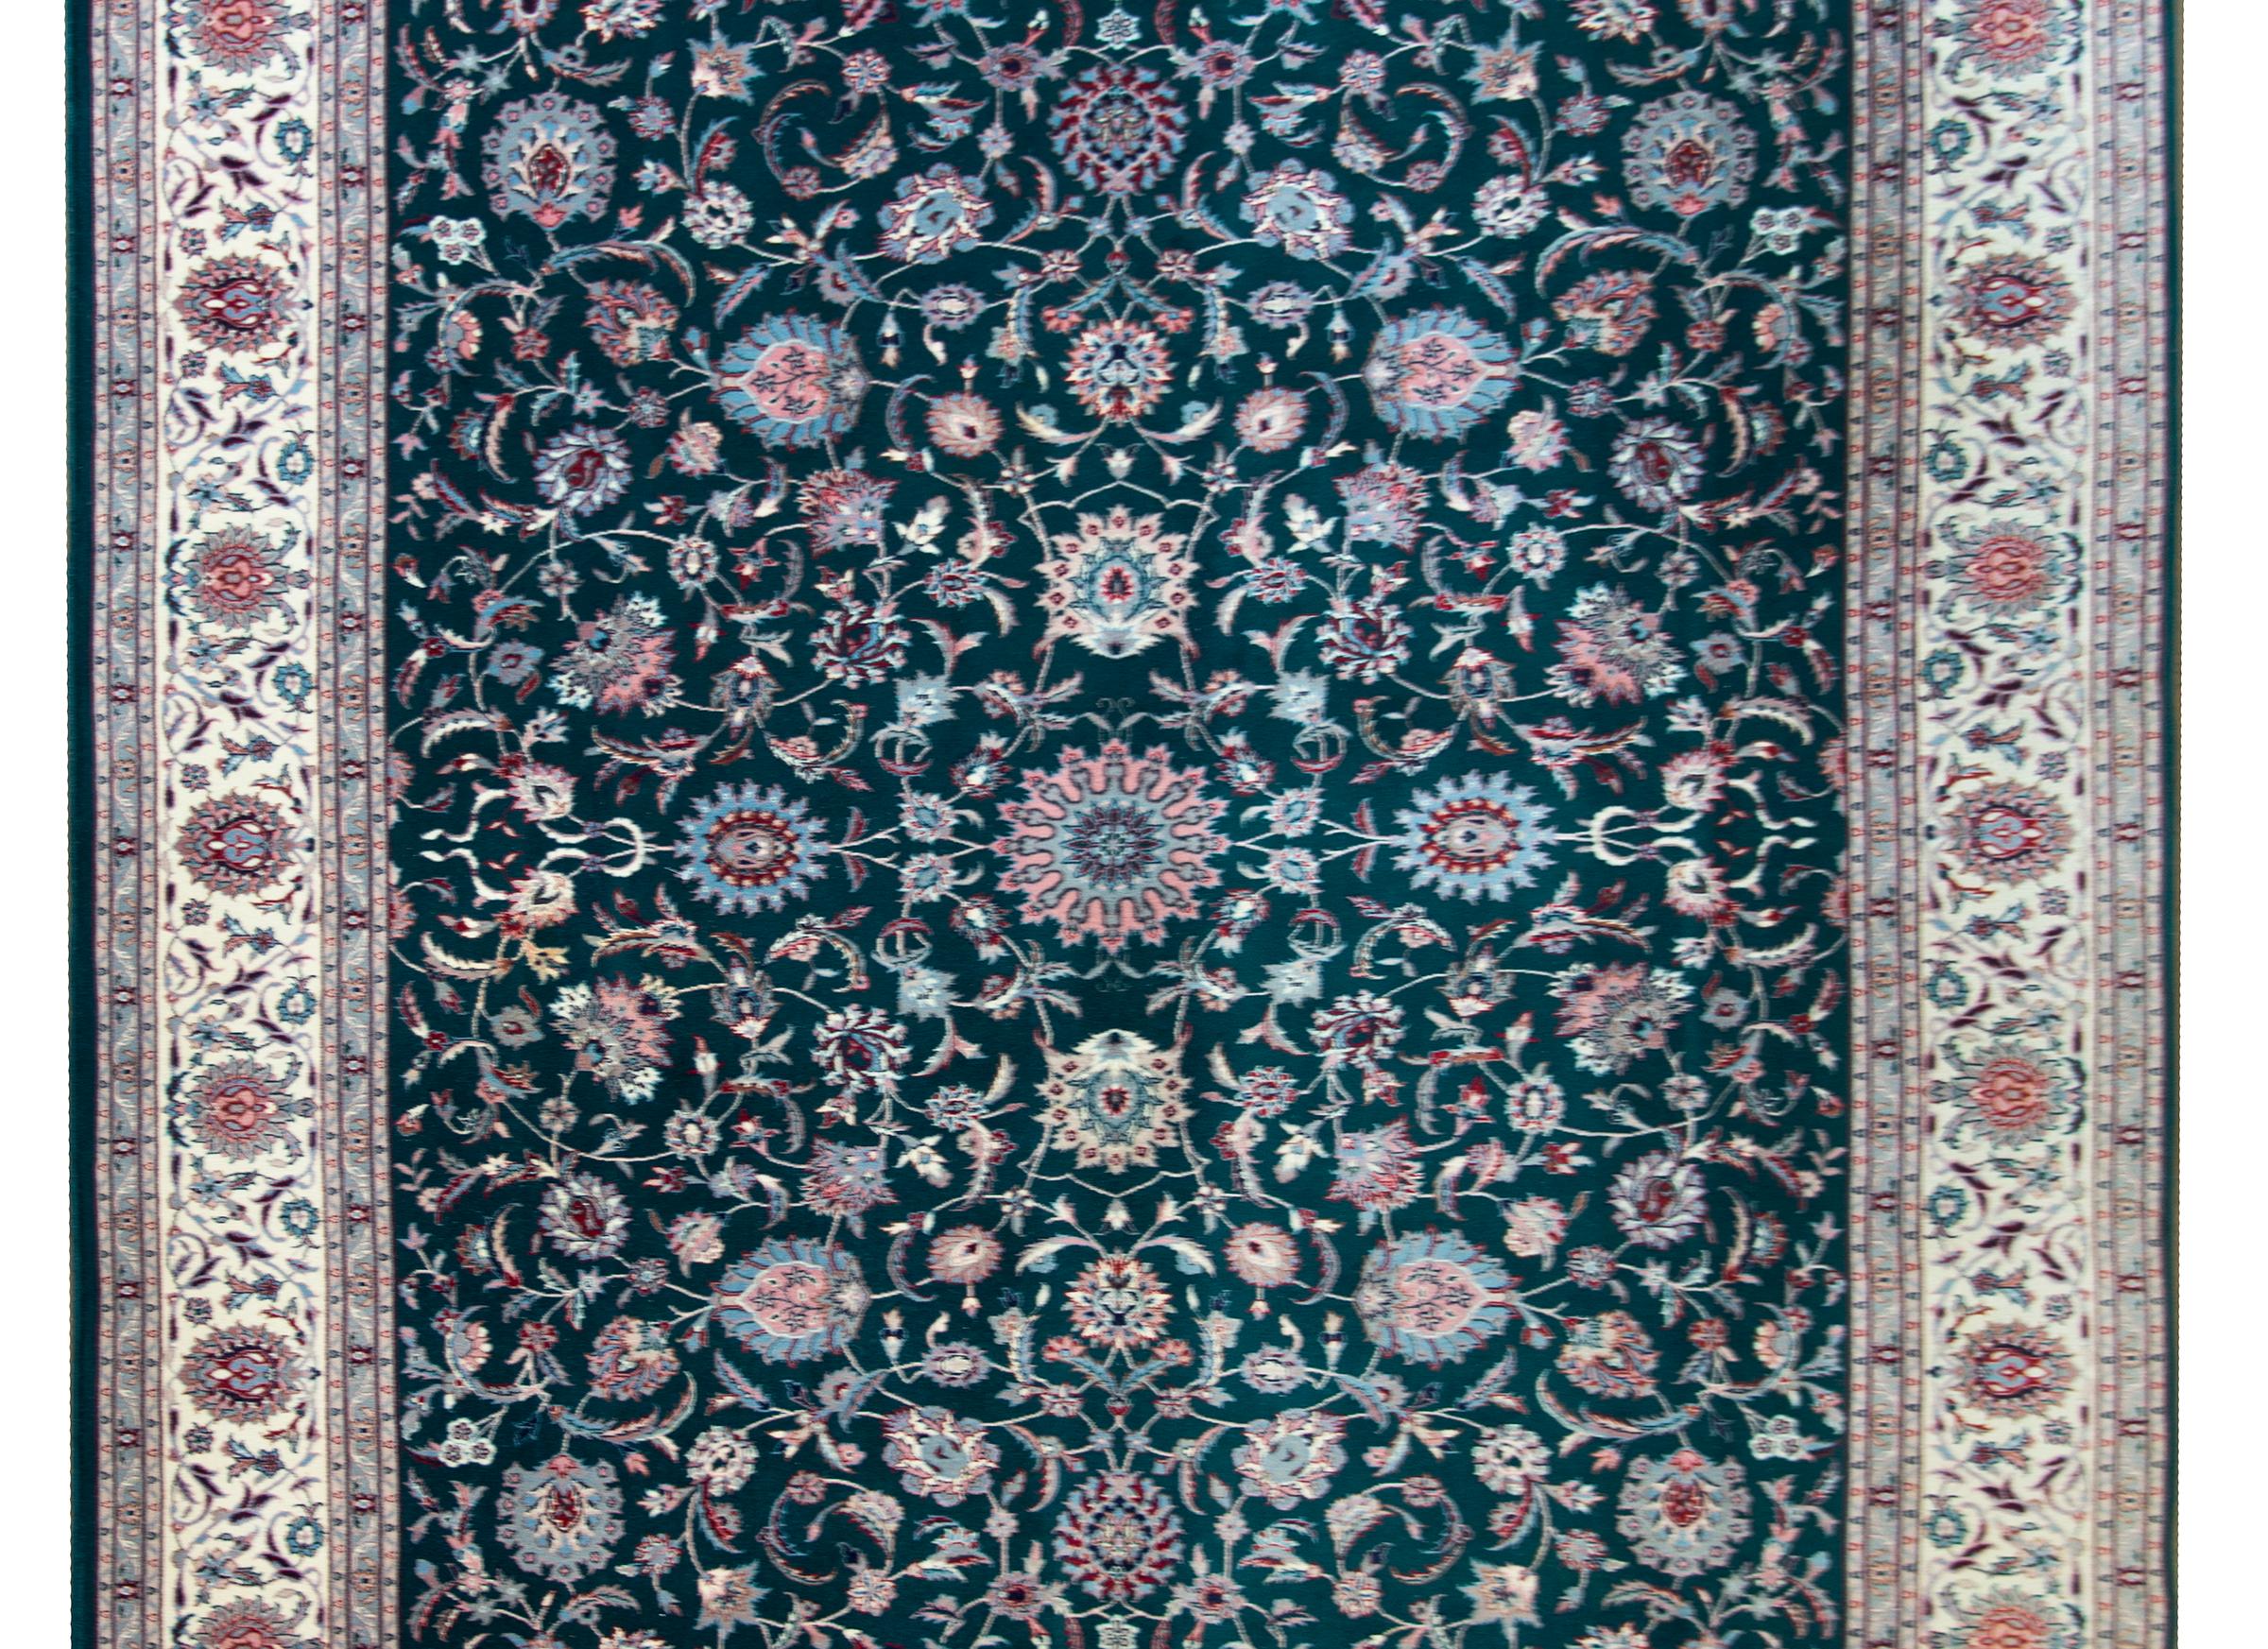 A wonderful late 20th century hand-knotted wool Indian rug with a Tabriz pattern containing an allover large-scale floral and scrolling vine pattern woven in light indigo, pink, crimson, and white, set against a dark indigo background, and